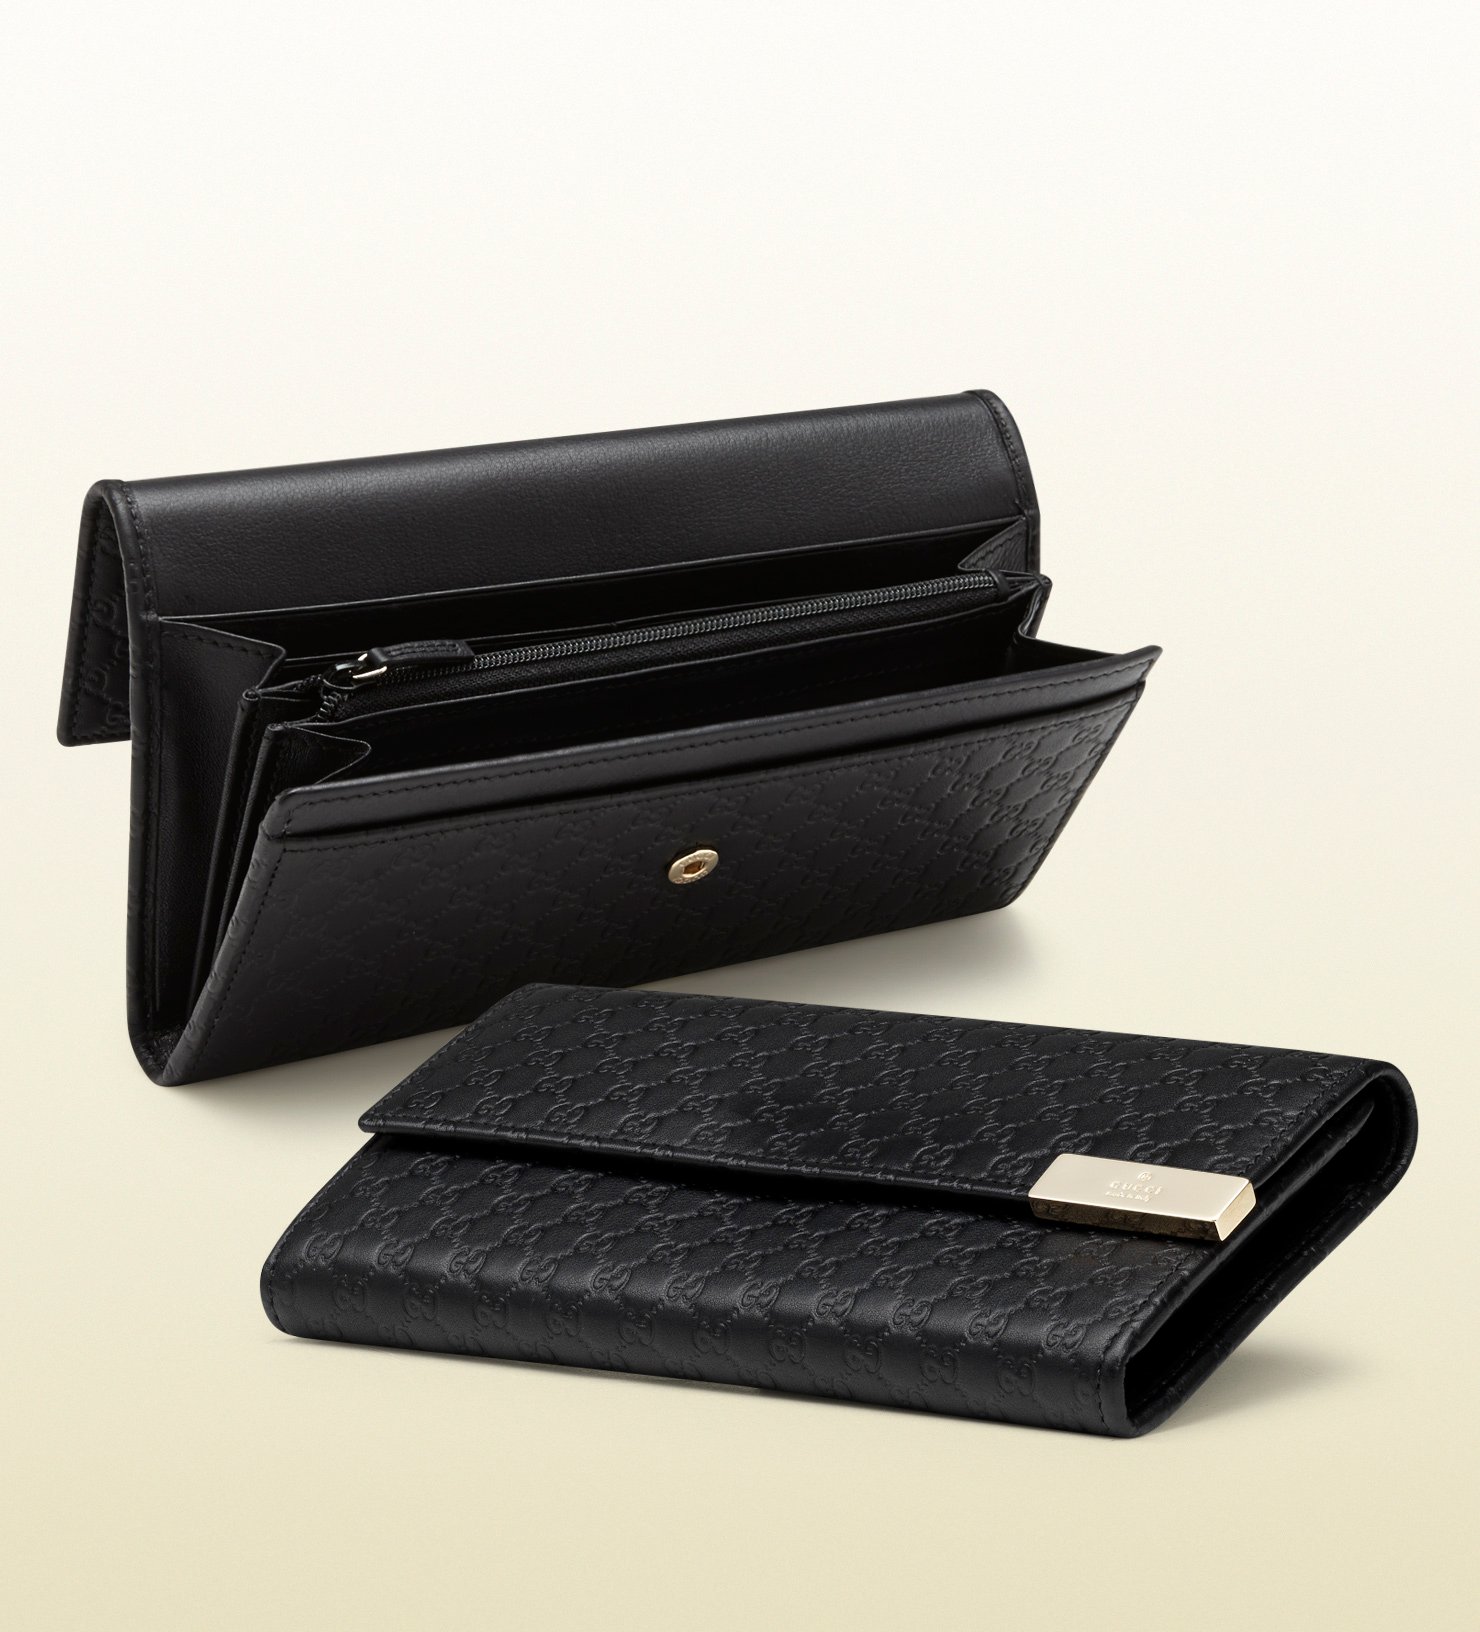 Lyst - Gucci Microssima Leather Continental Wallet in Black